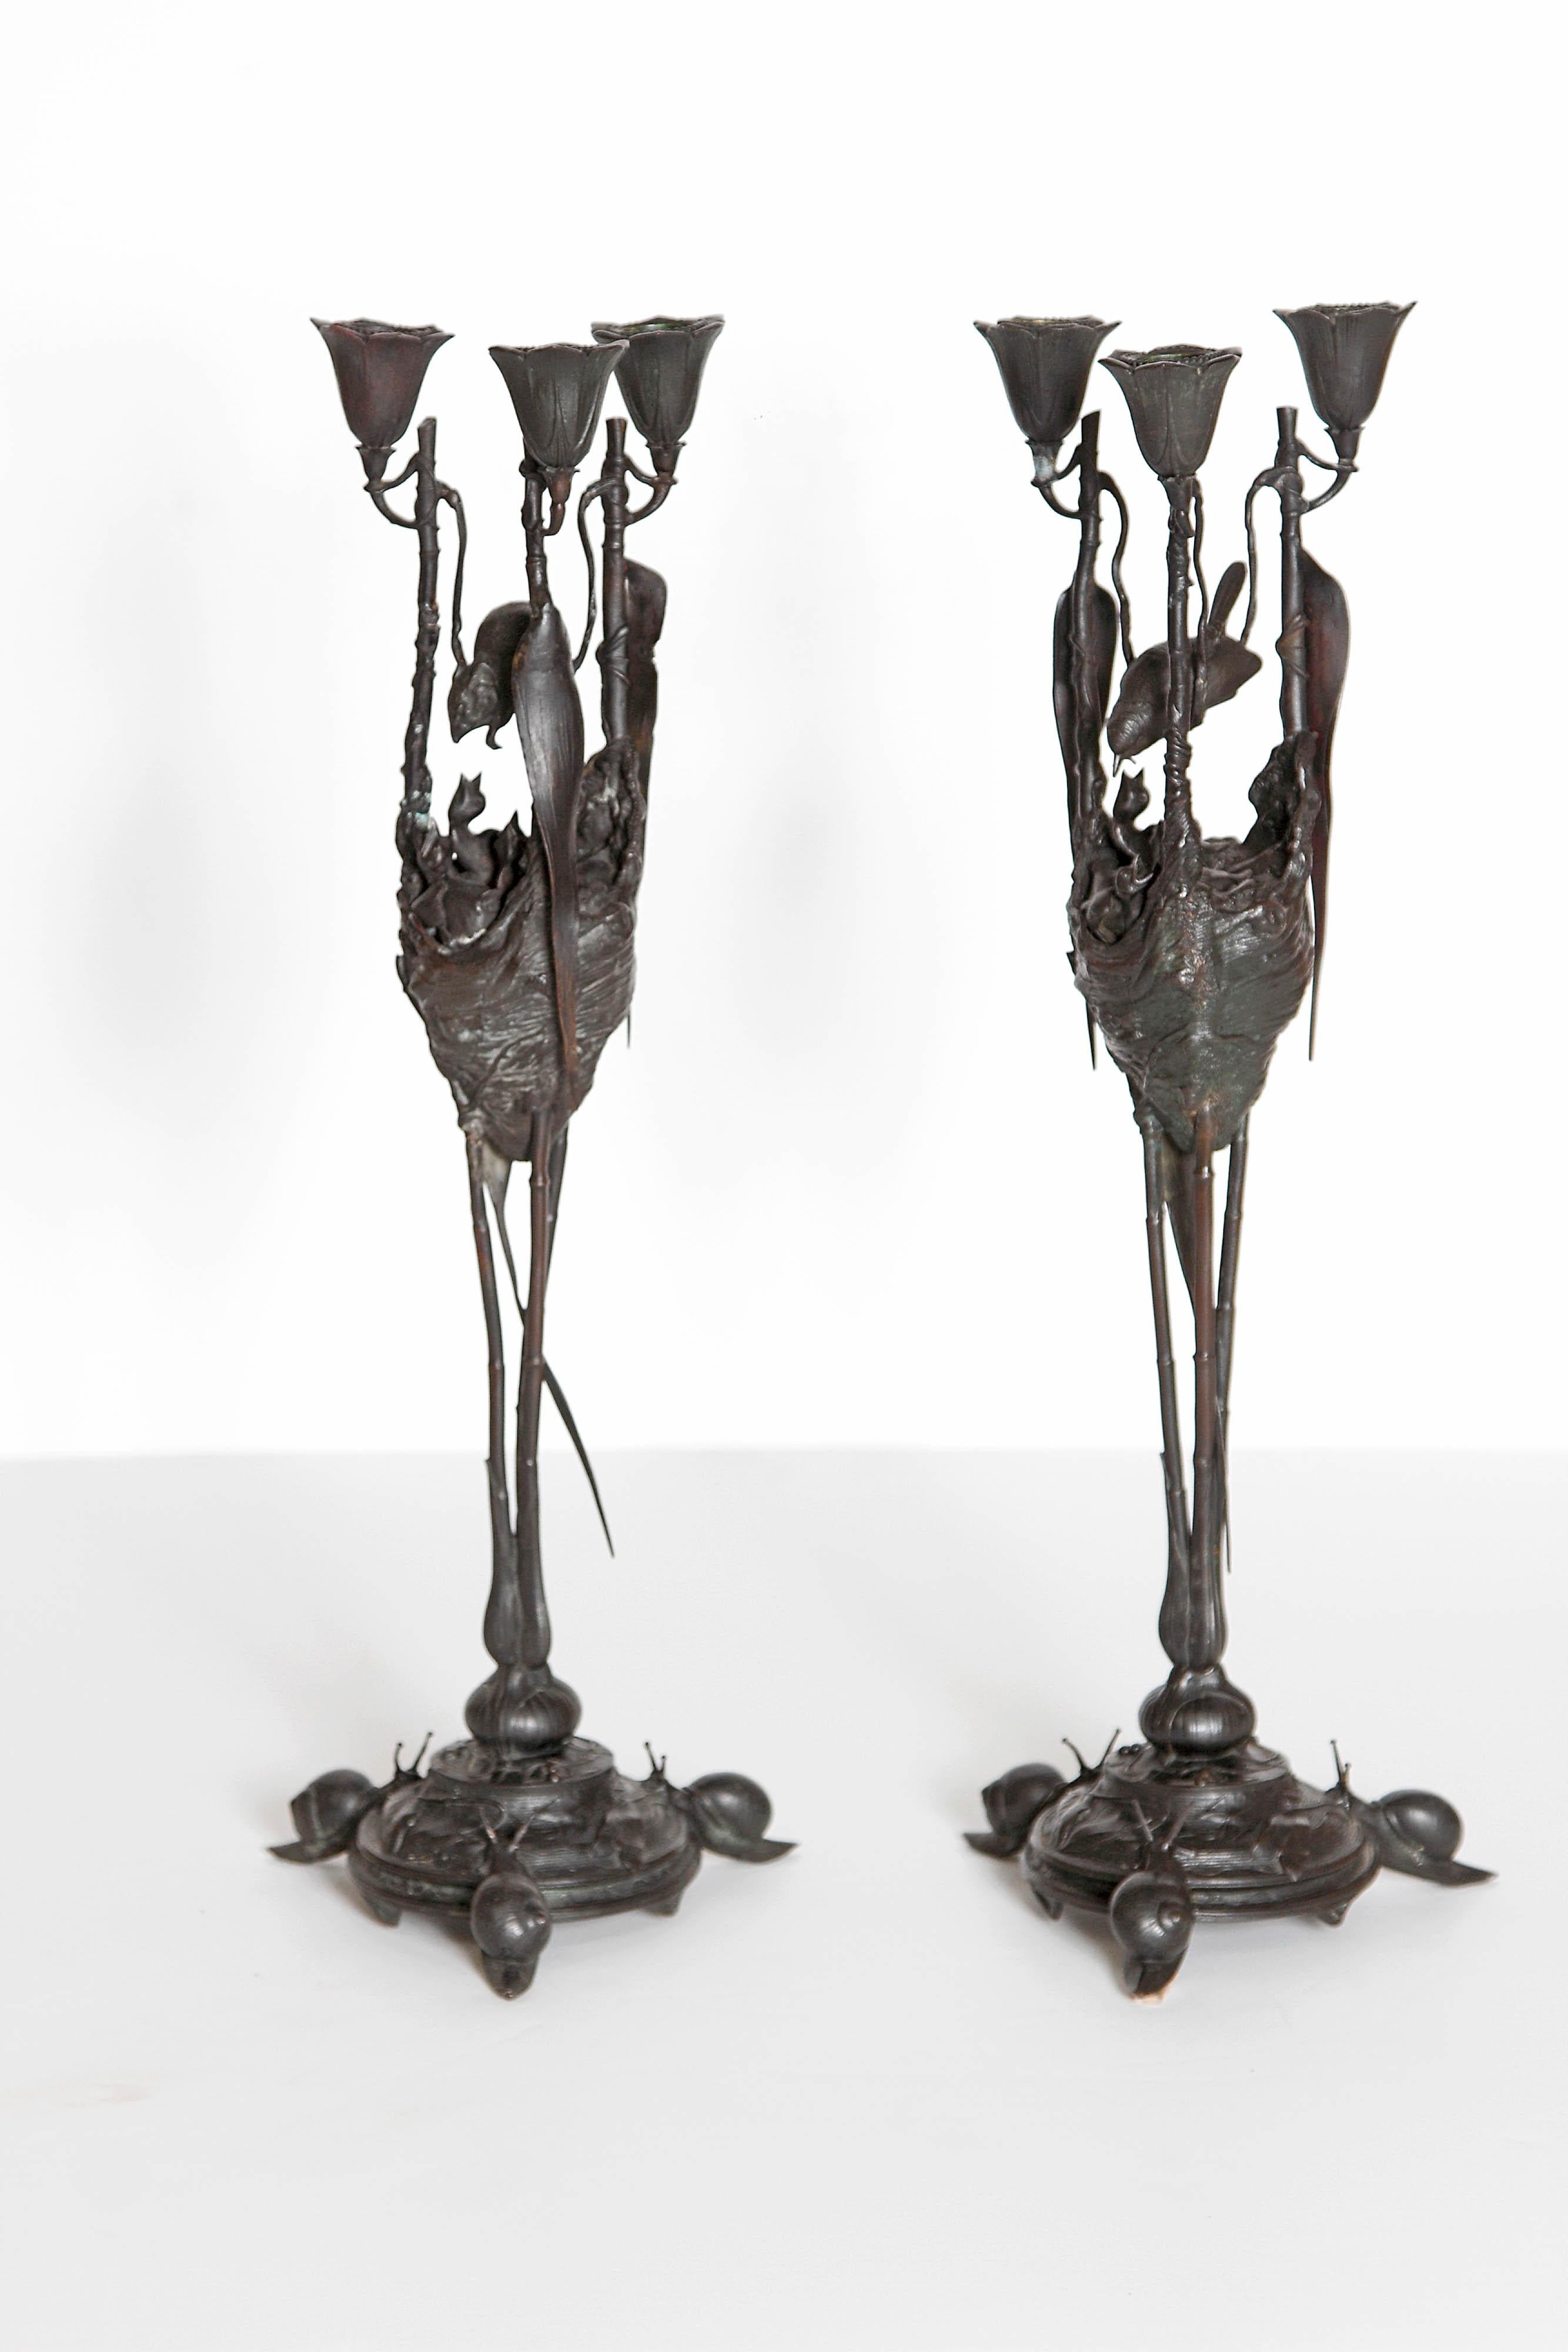 19th Century Auguste-Nicolas Cain, Pair of French Candelabra with Bird's Nest